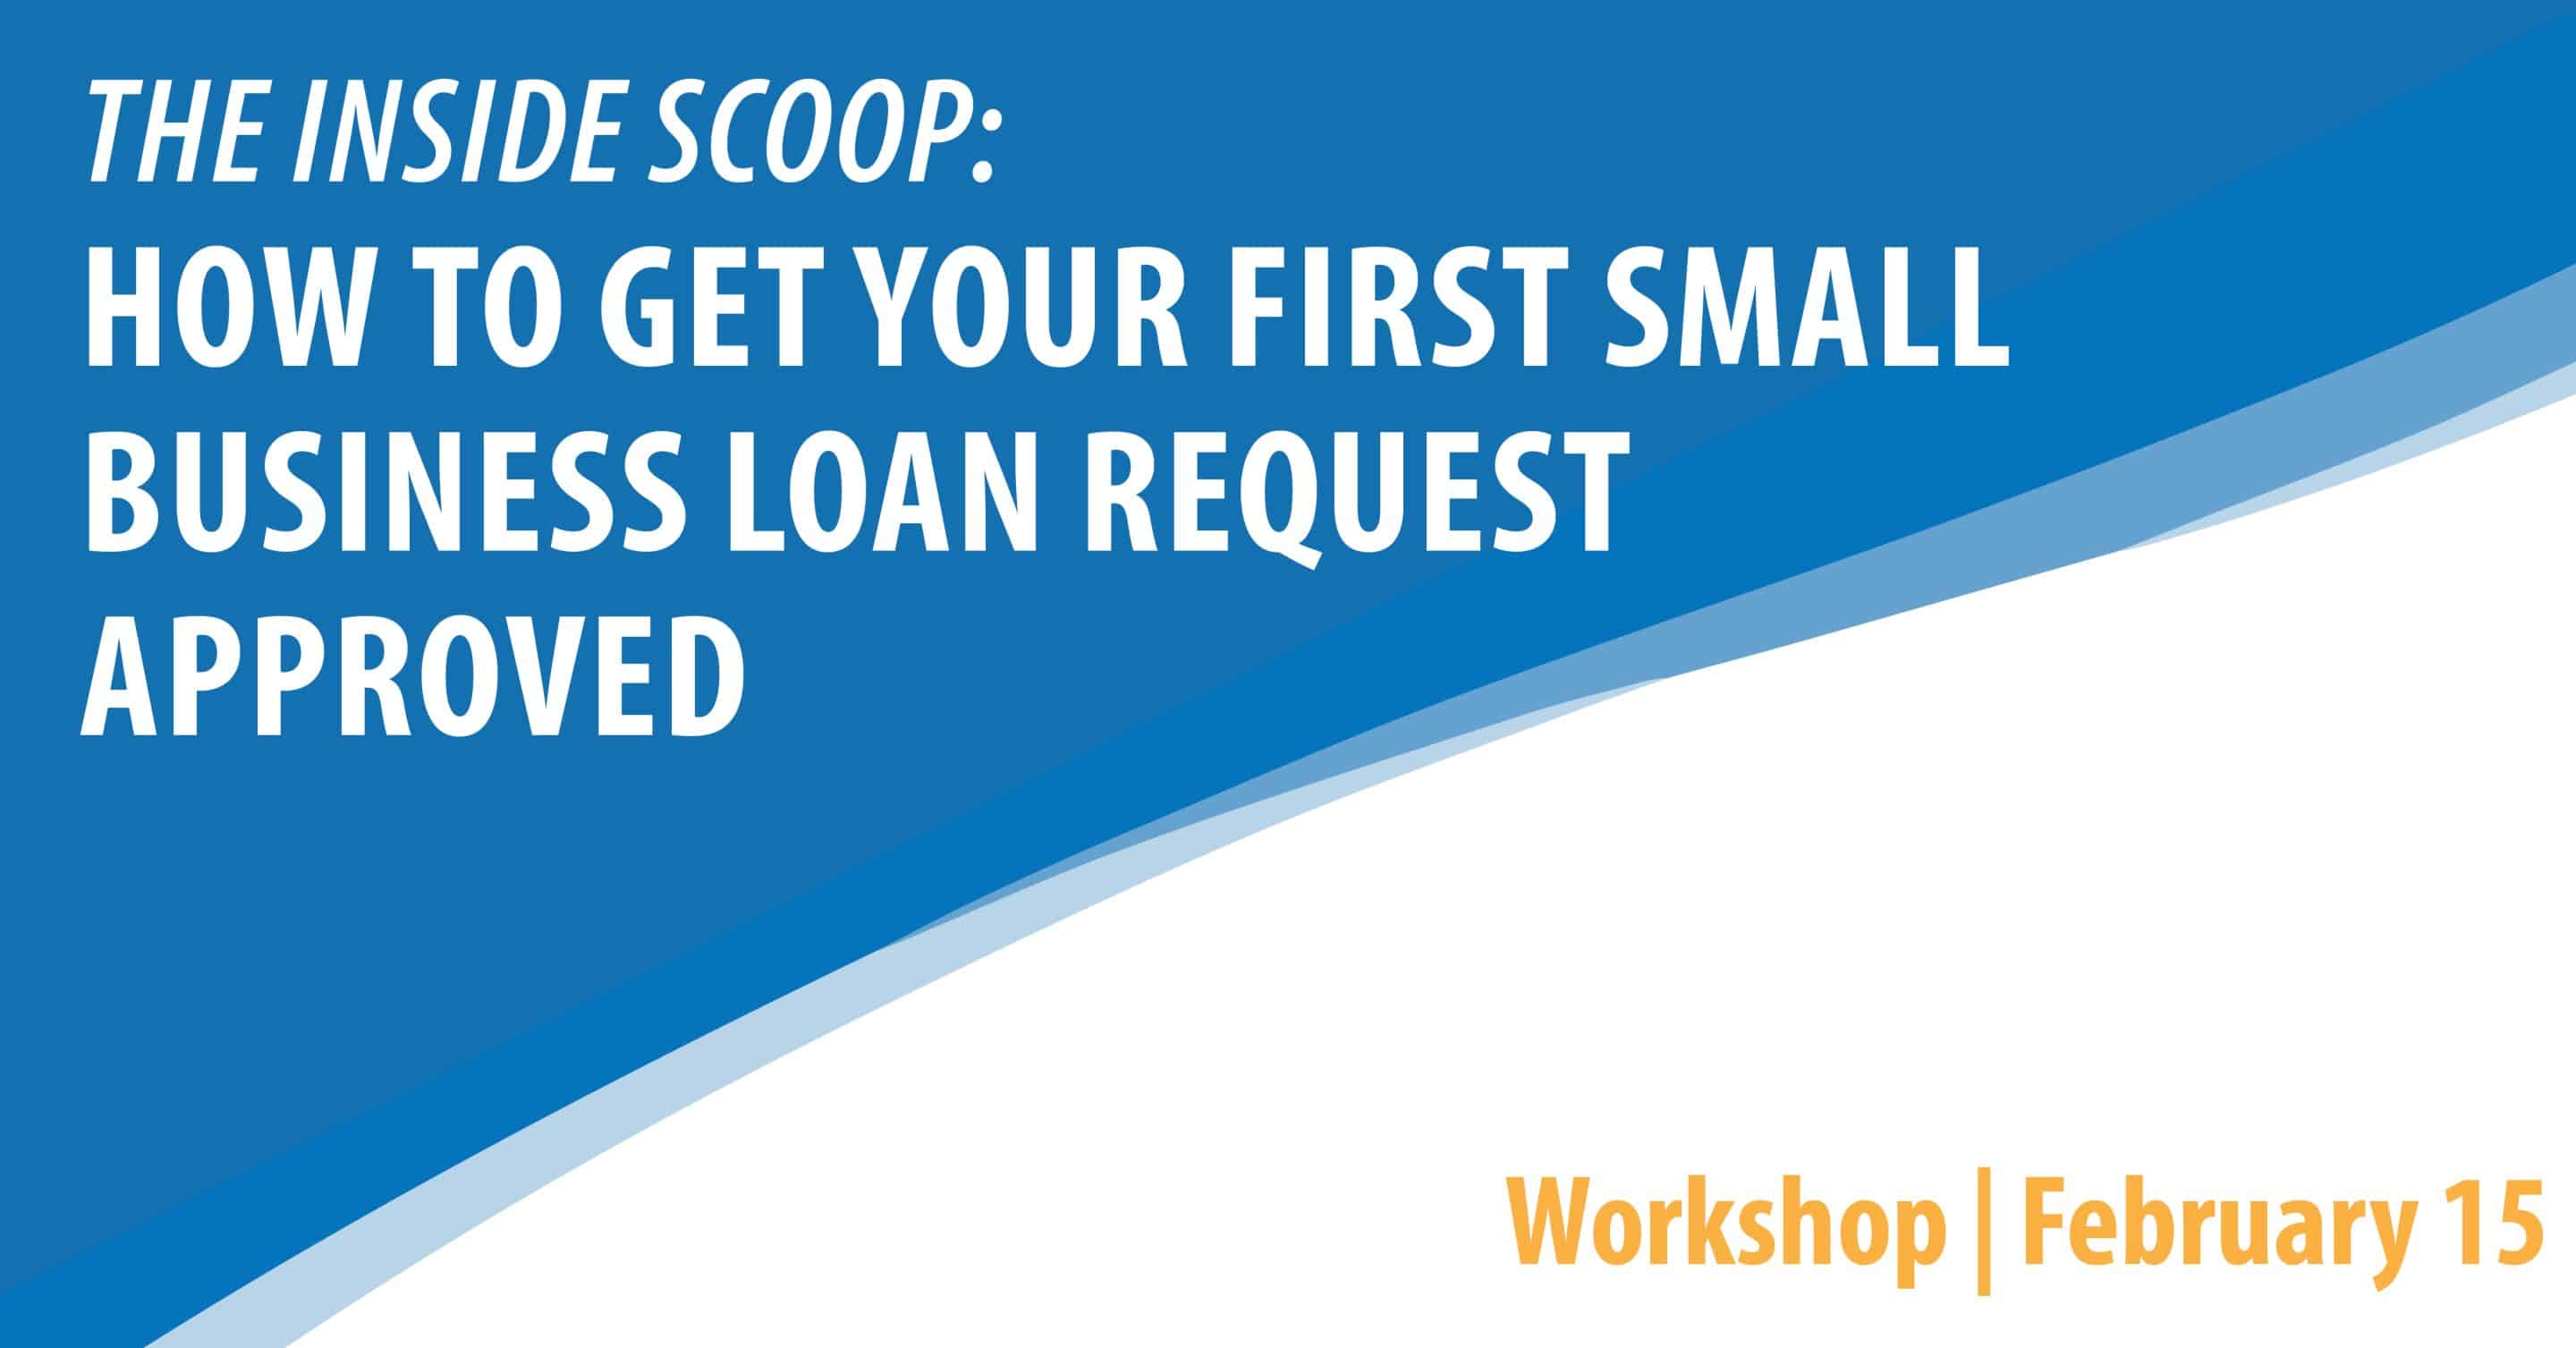 The Inside Scoop:  How to Get Your First Small Business Loan Request Approved - Cheyenne